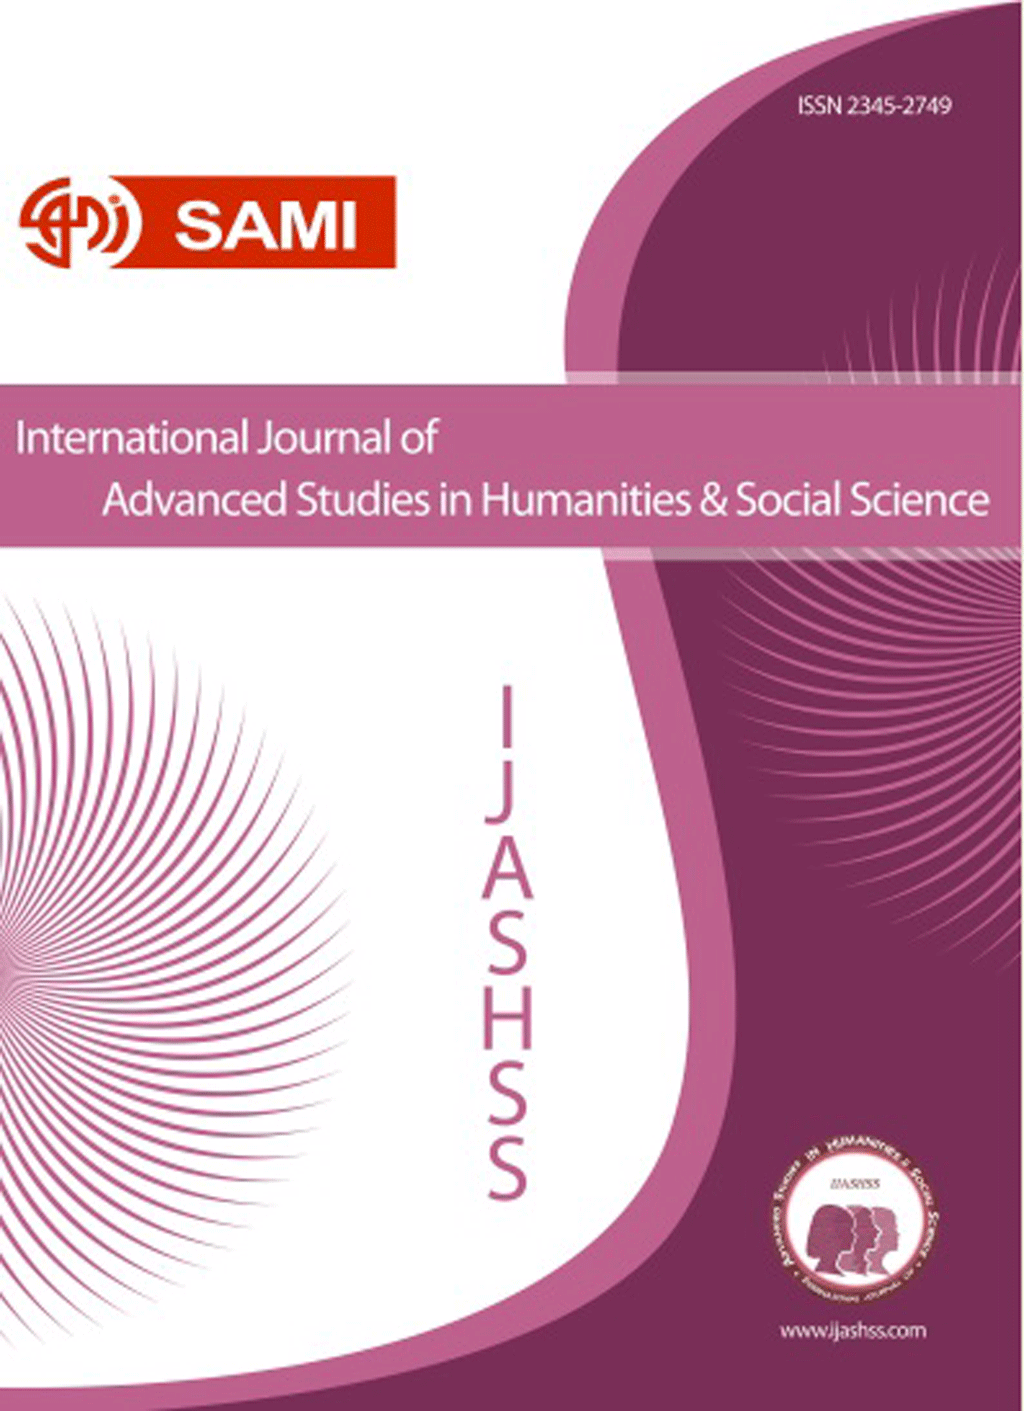 International Journal of Advanced Studies in Humanities and Social Science - January 2015, Volume 4 -  Issue 1